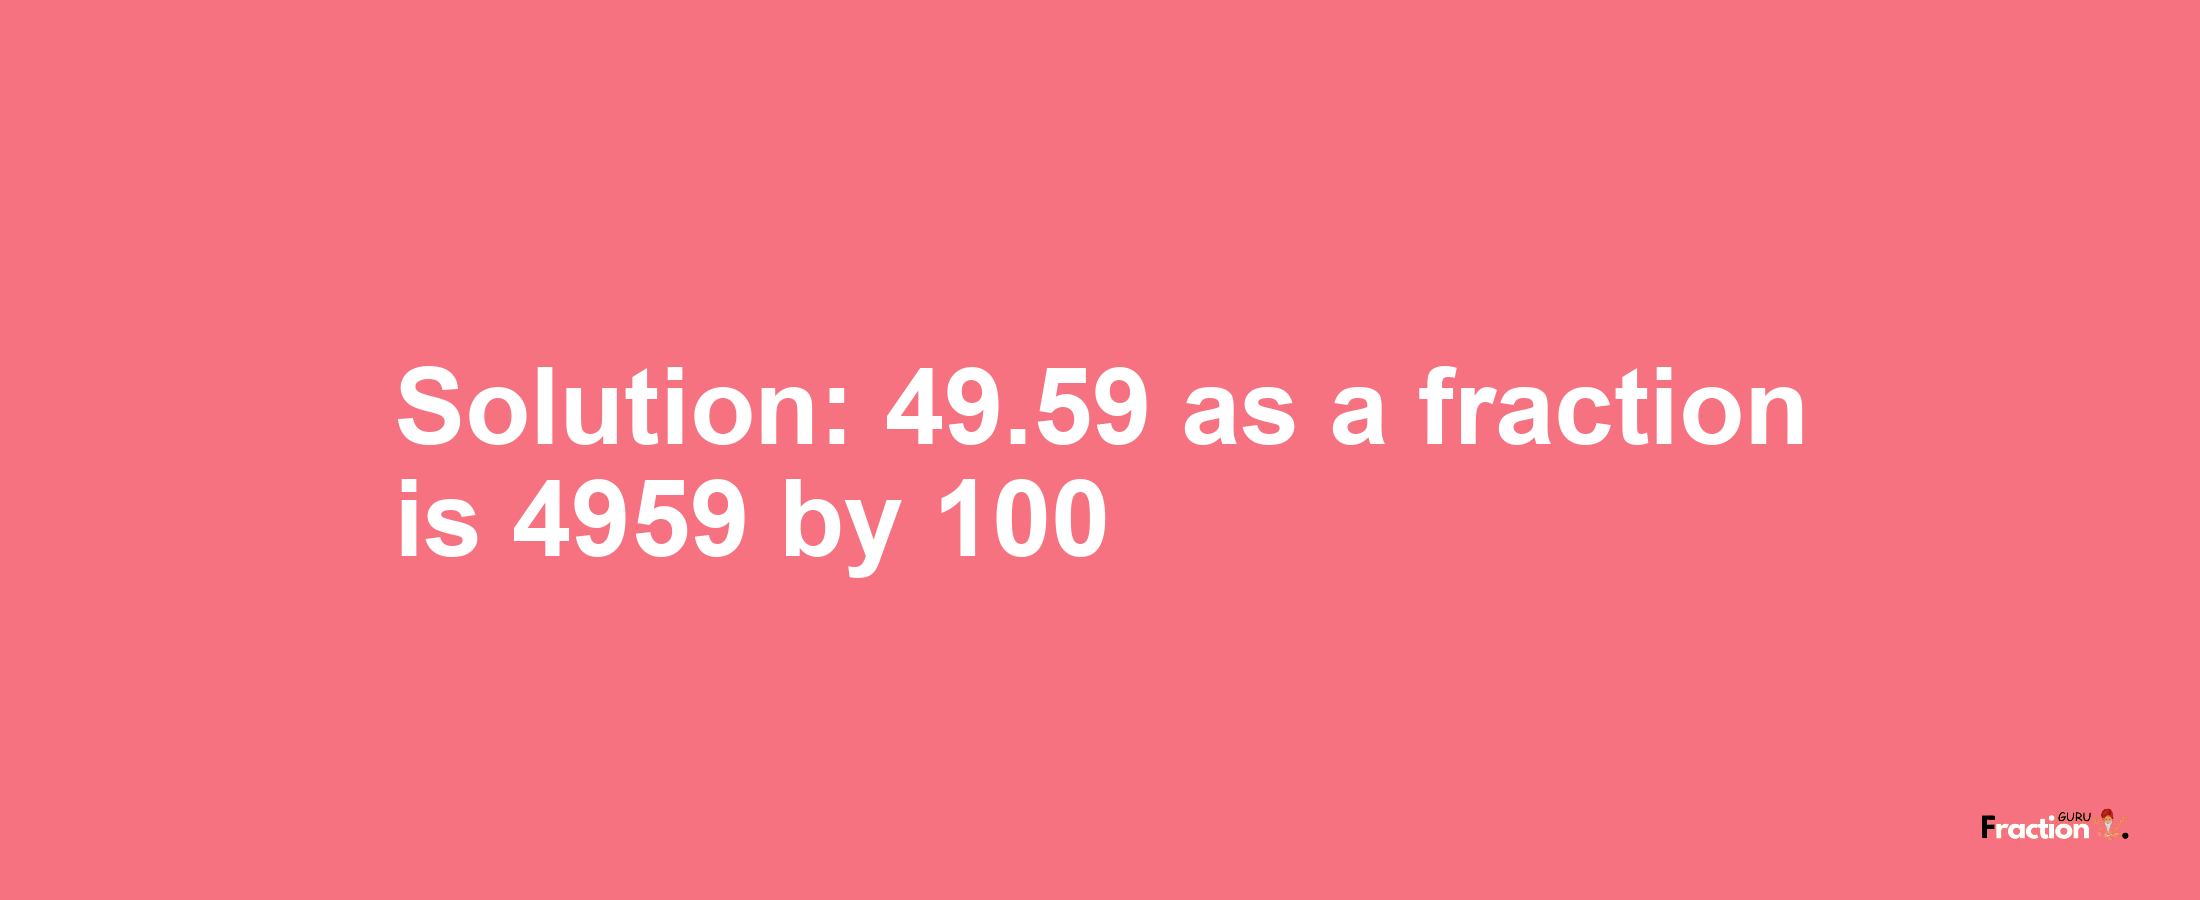 Solution:49.59 as a fraction is 4959/100